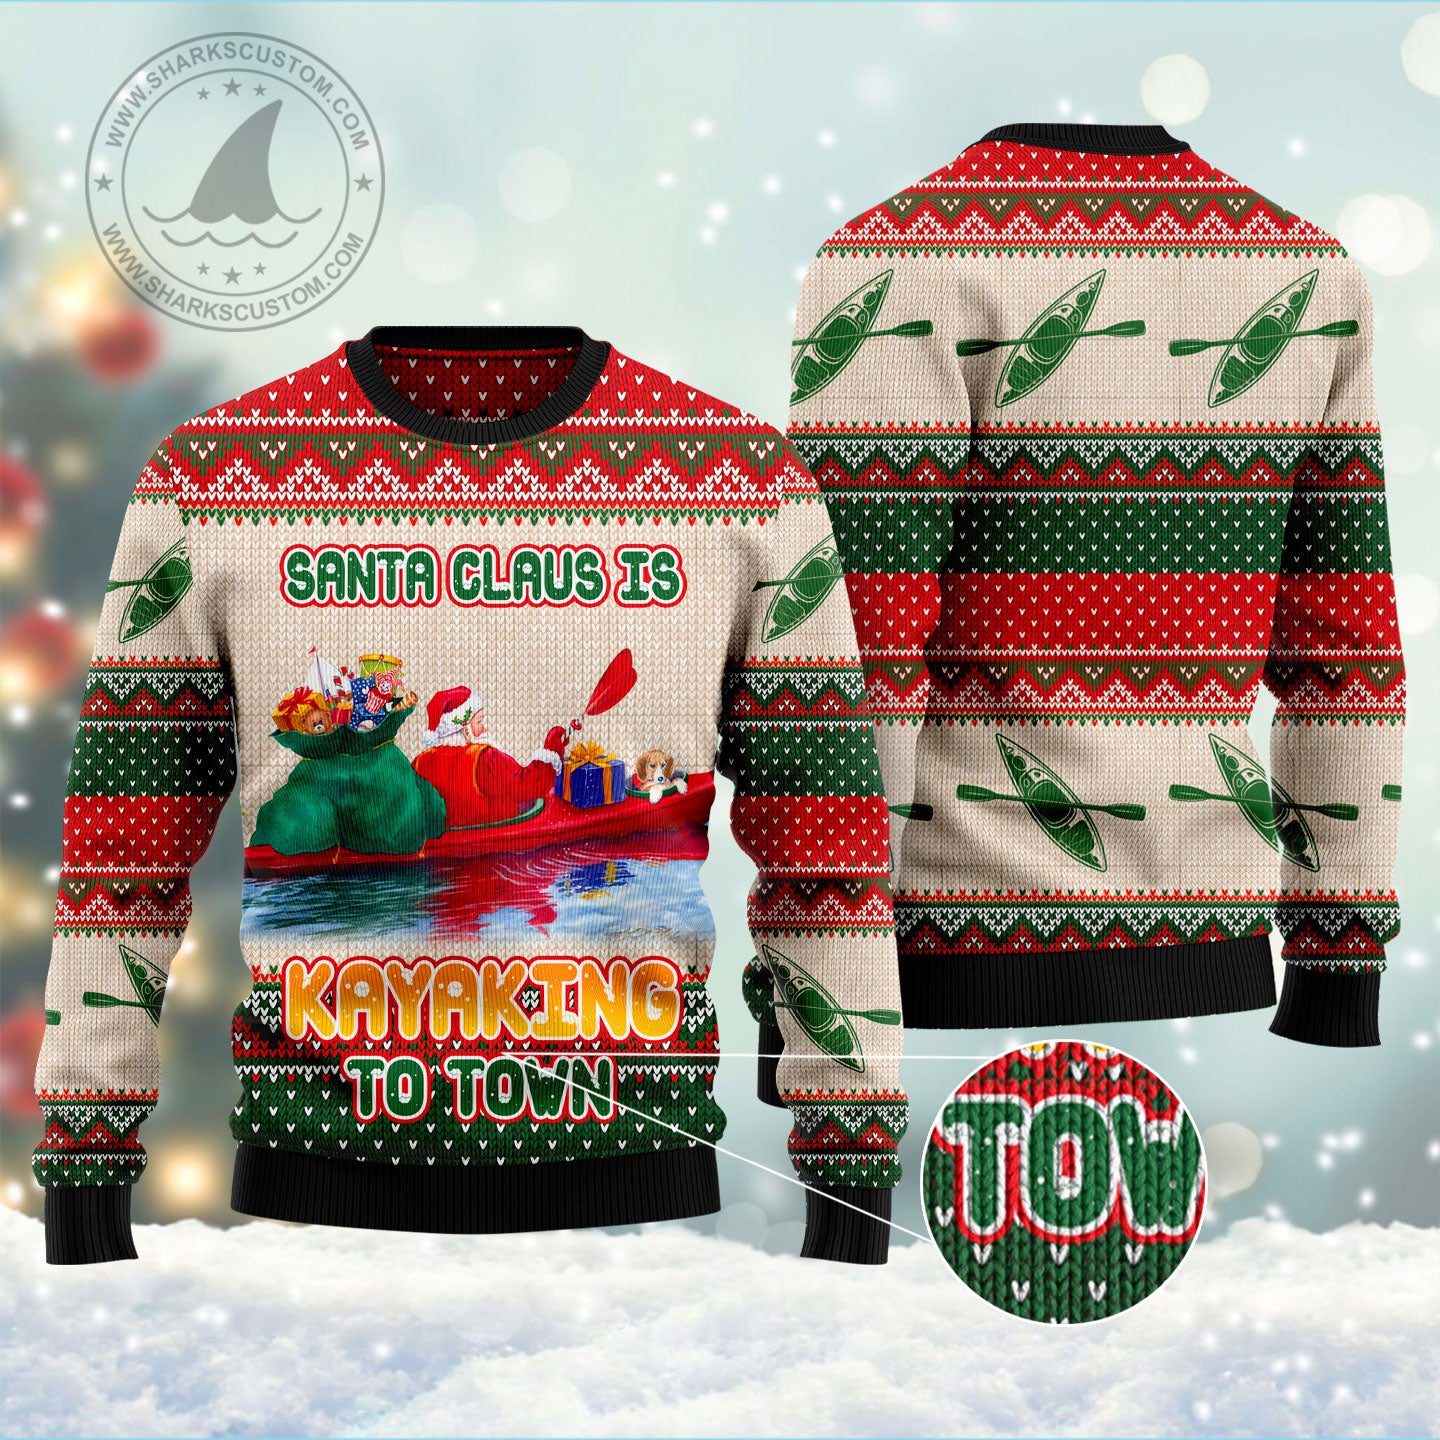 Santa Claus Is Kayaking To Town HT101306 Ugly Christmas Sweater unisex womens & mens, couples matching, friends, funny family sweater gifts (plus size available)